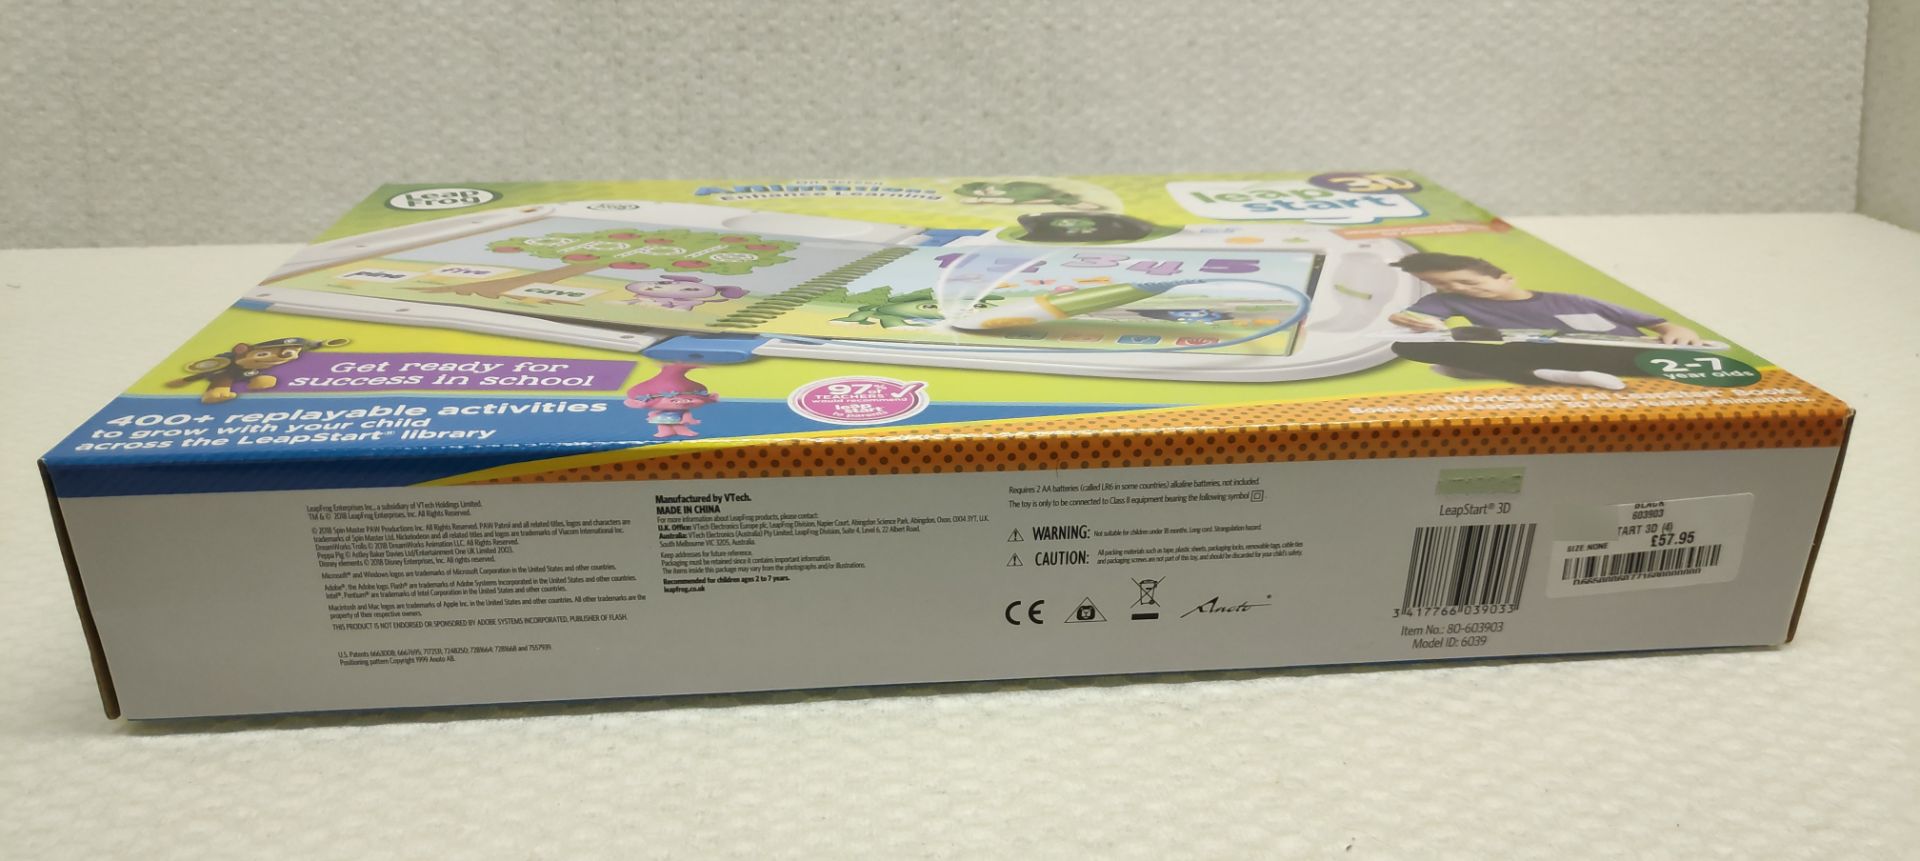 1 x LeapFrog LeapStart 3D Interactive Learing System - New/Boxed - Image 5 of 6